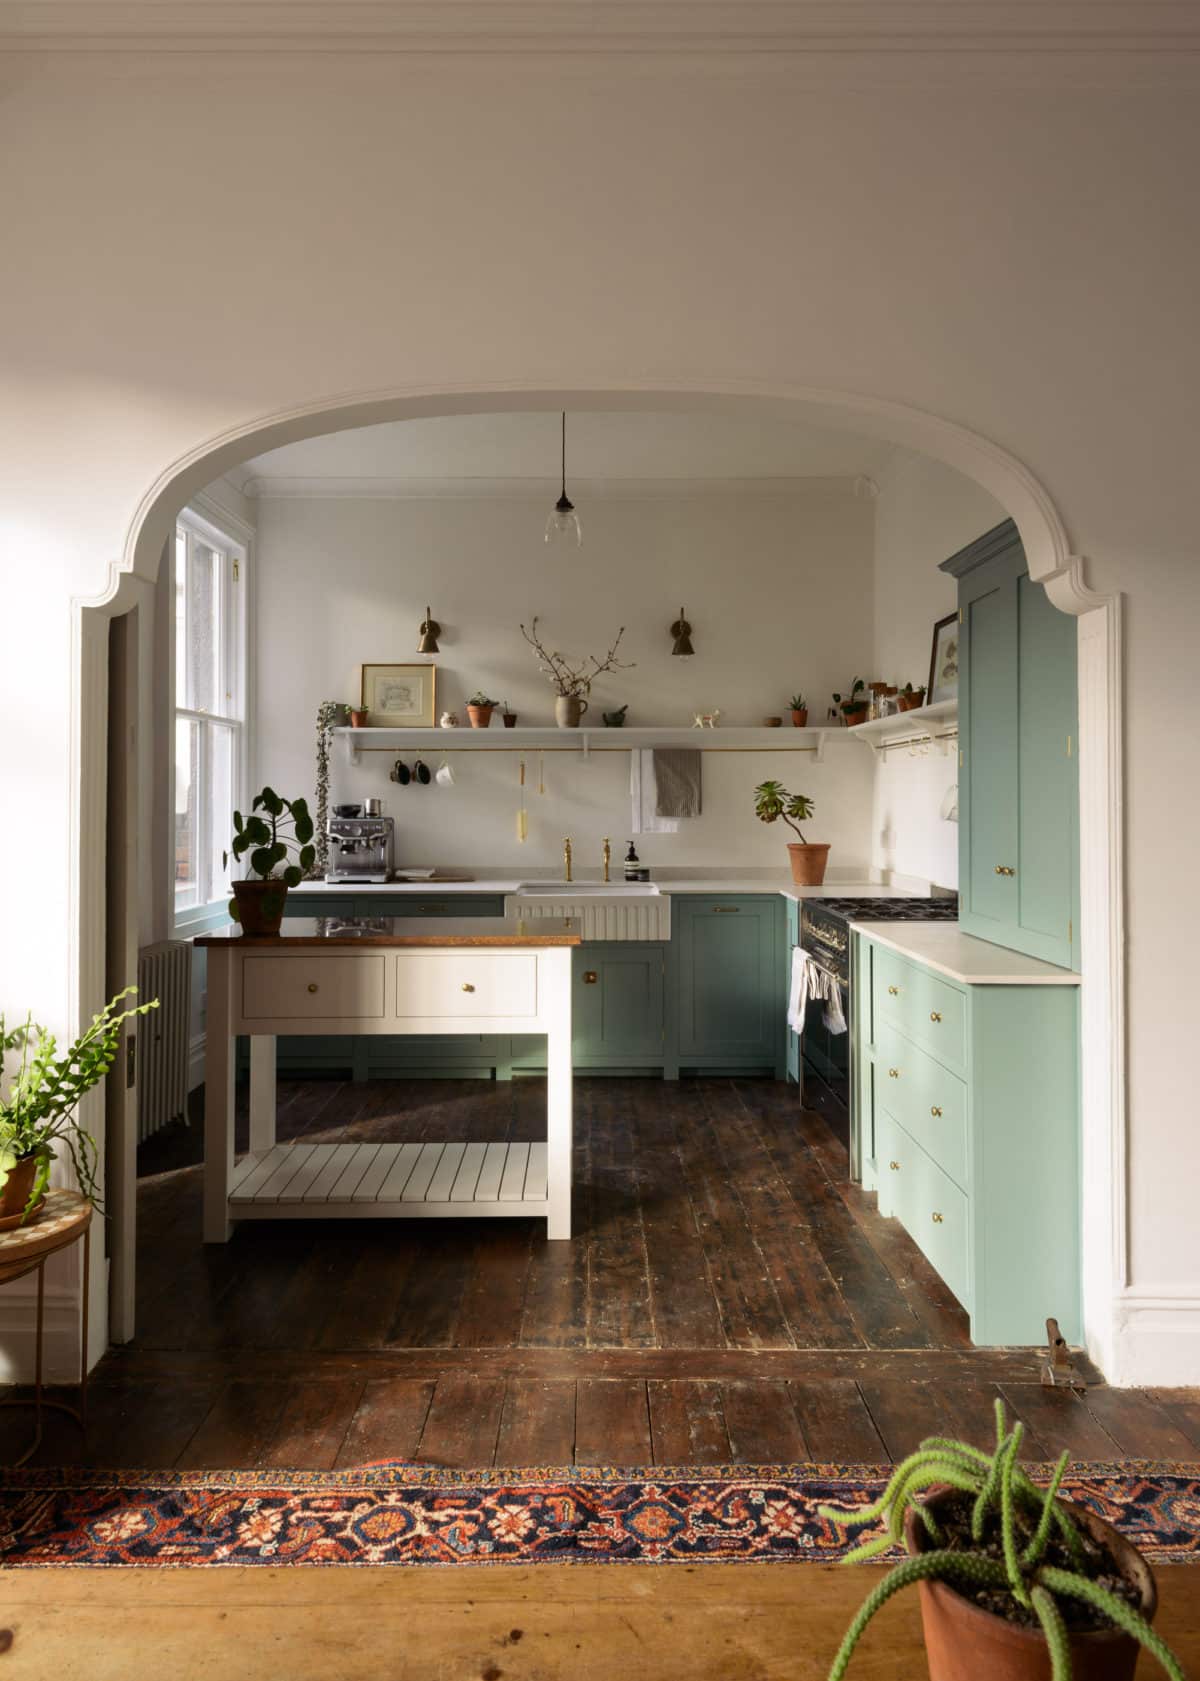 the impeccable style of deVOL Bespoke Kitchens - remodel - kitchen remodel, kitchen design, kitchen decor